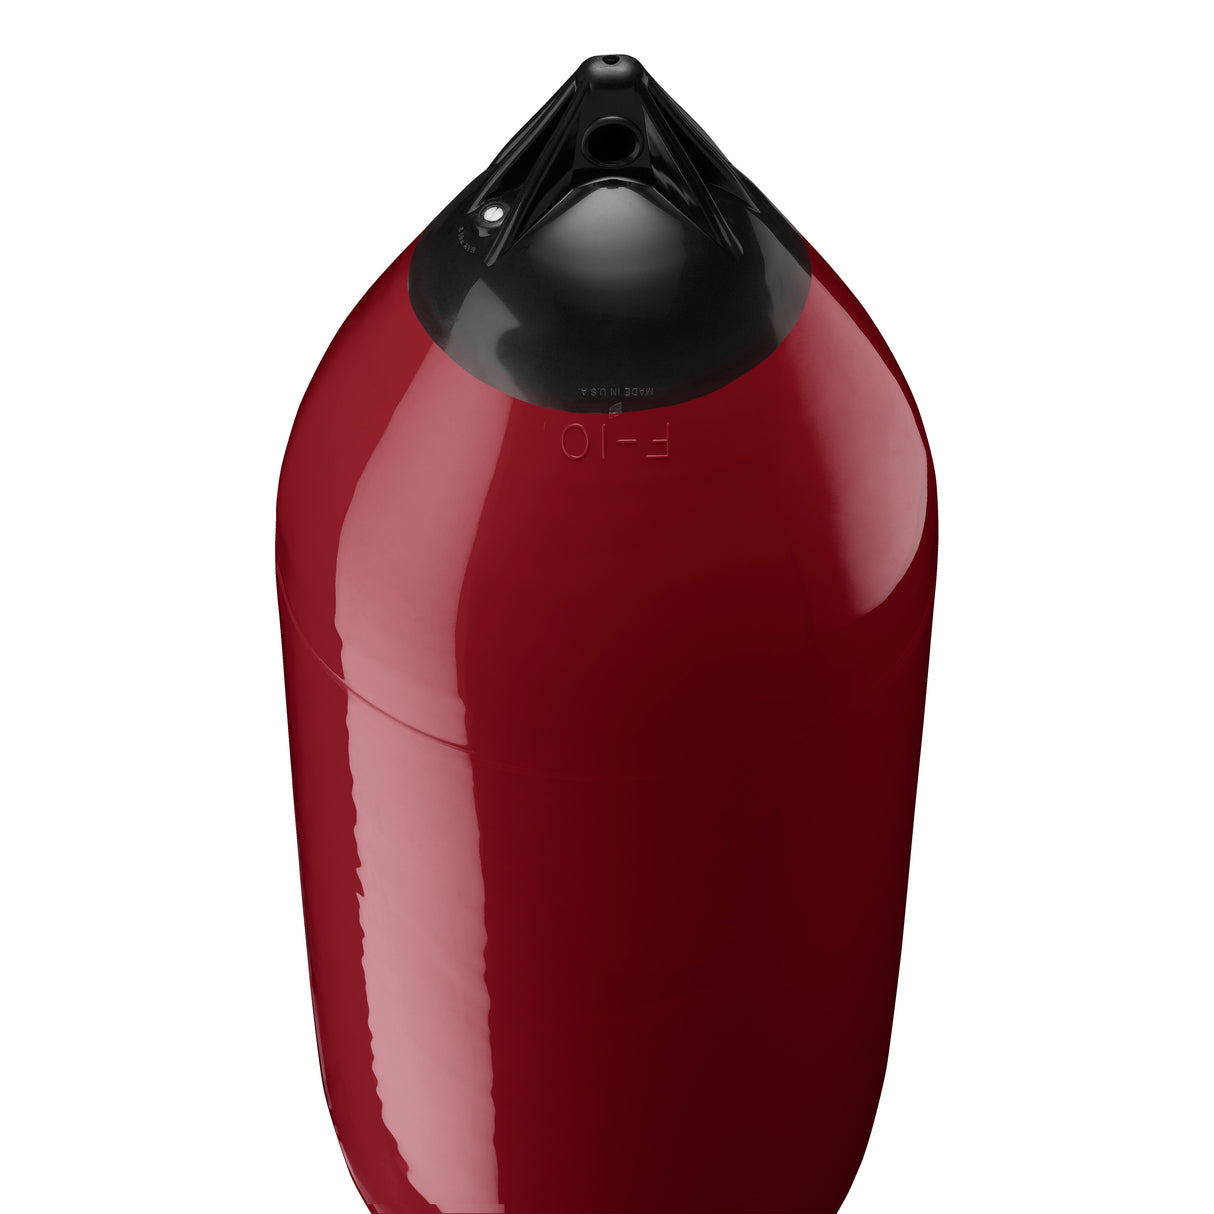 Burgundy boat fender with Navy-Top, Polyform F-10 angled shot